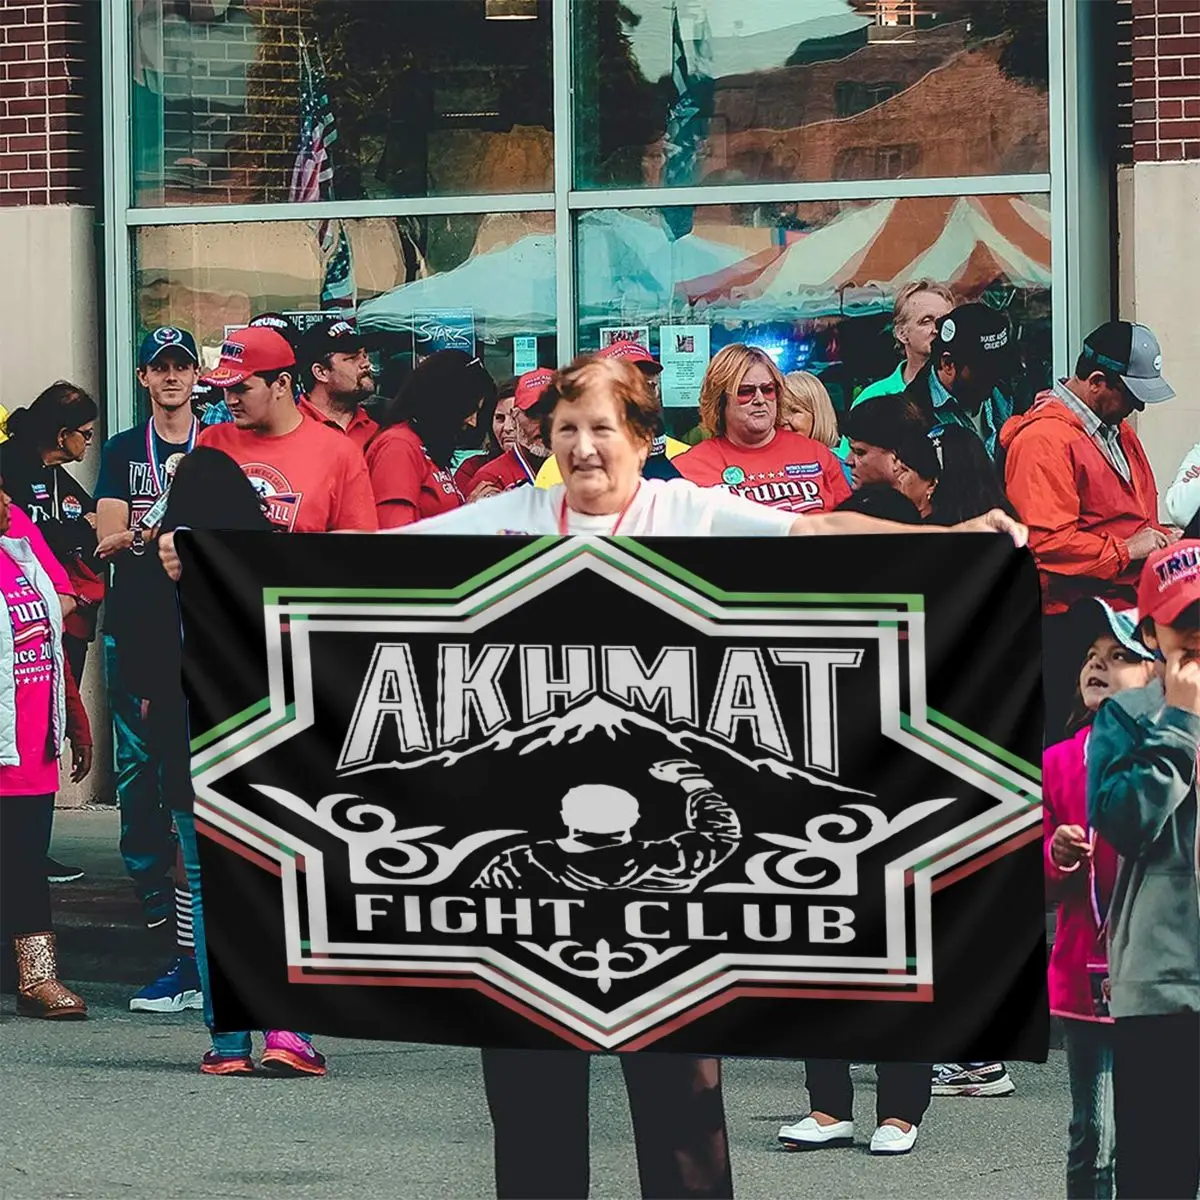 

New Akhmat Chechnya Fight Club Sportswear Russia 669761 Top Quality Comfortable Trend Banner Home Outdoor Gift Party Flag